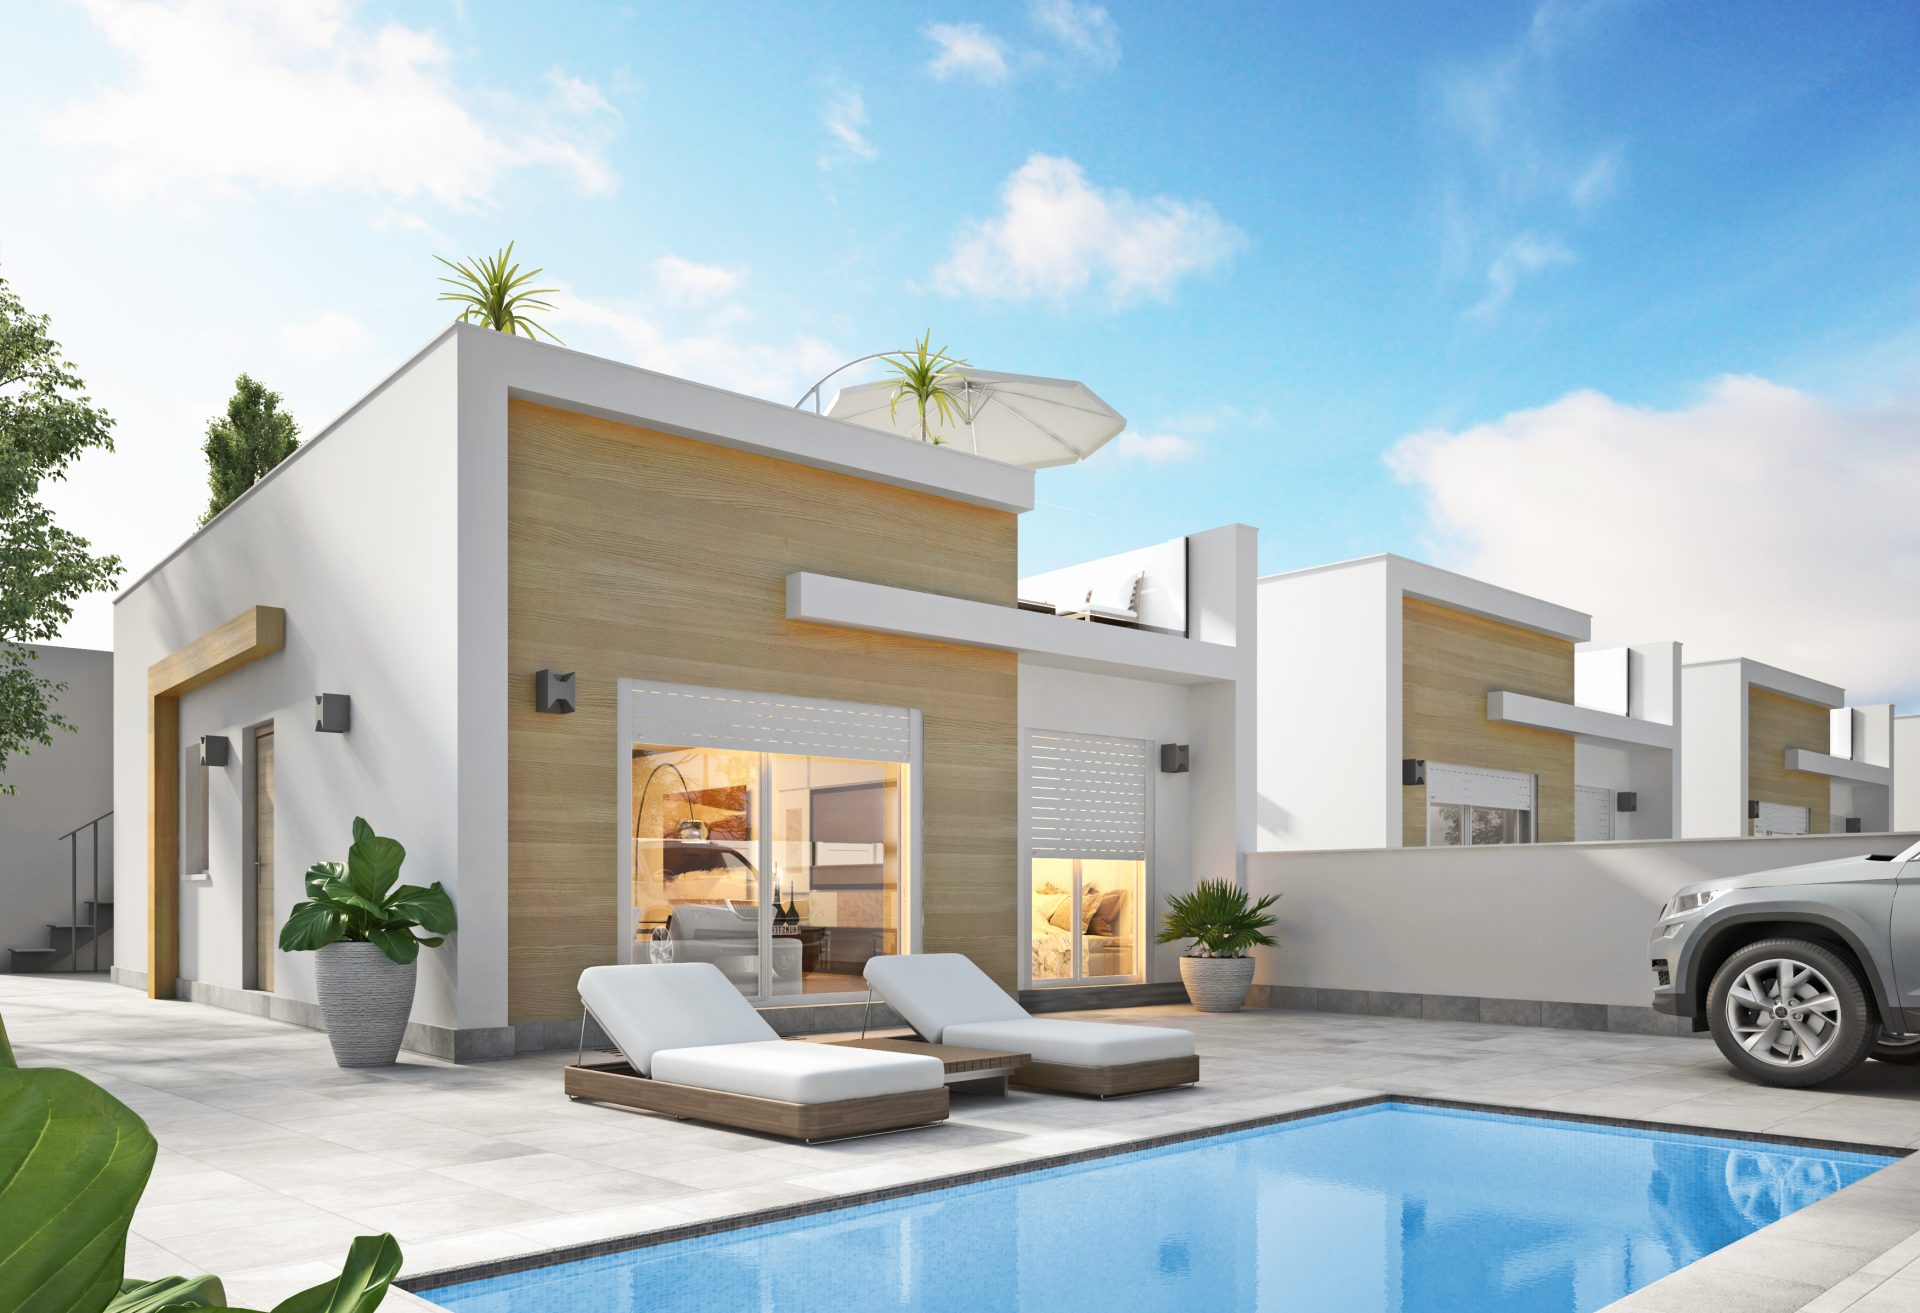 3 Bedroom Villa with Private Pool in Avileses Phase 3